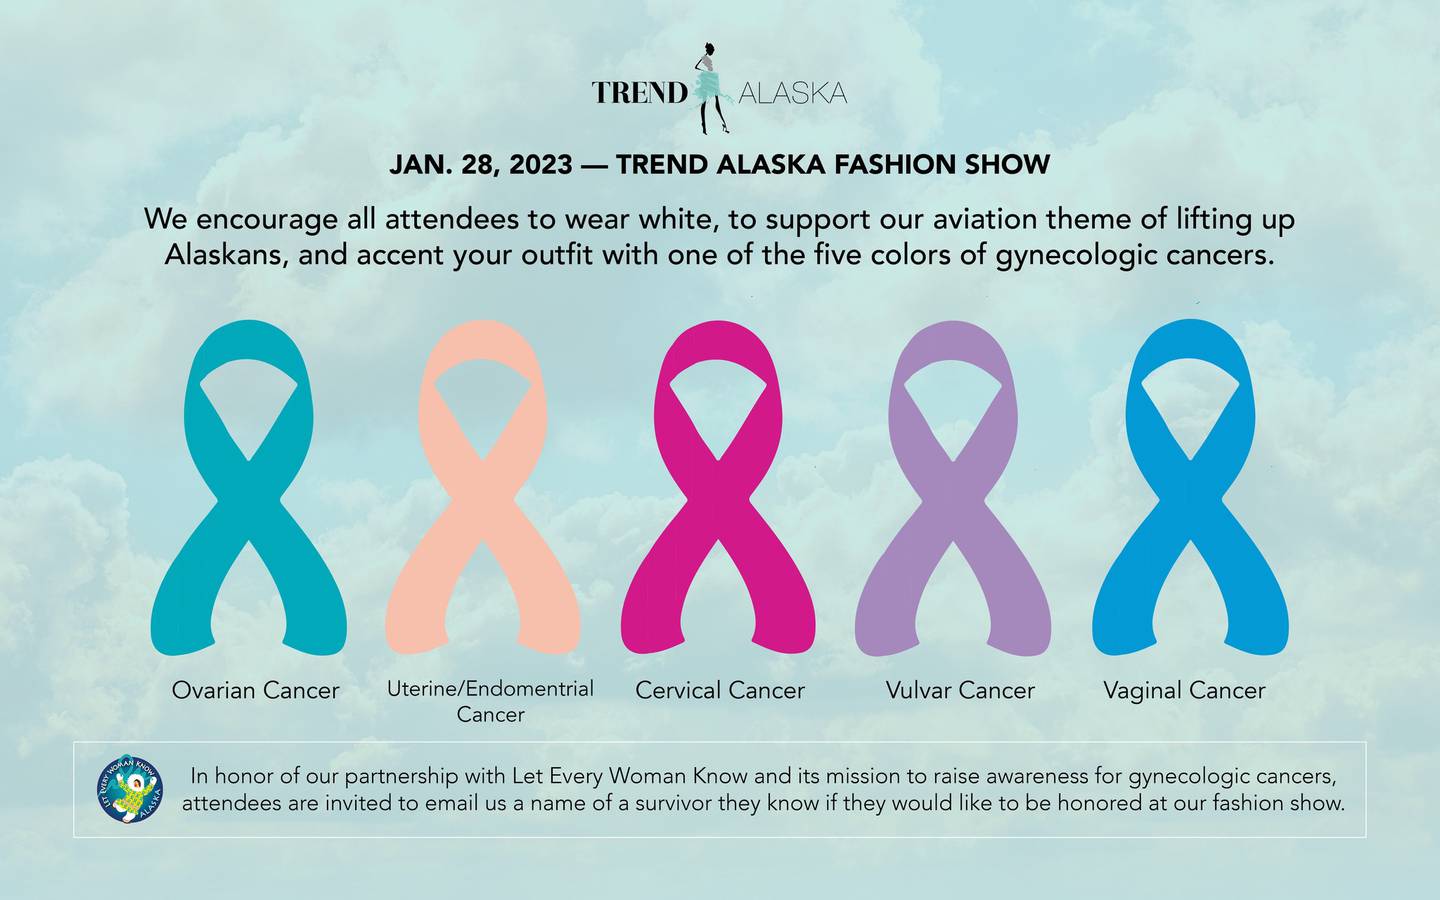 A chart with the five colors that represent different types of gynecological cancer